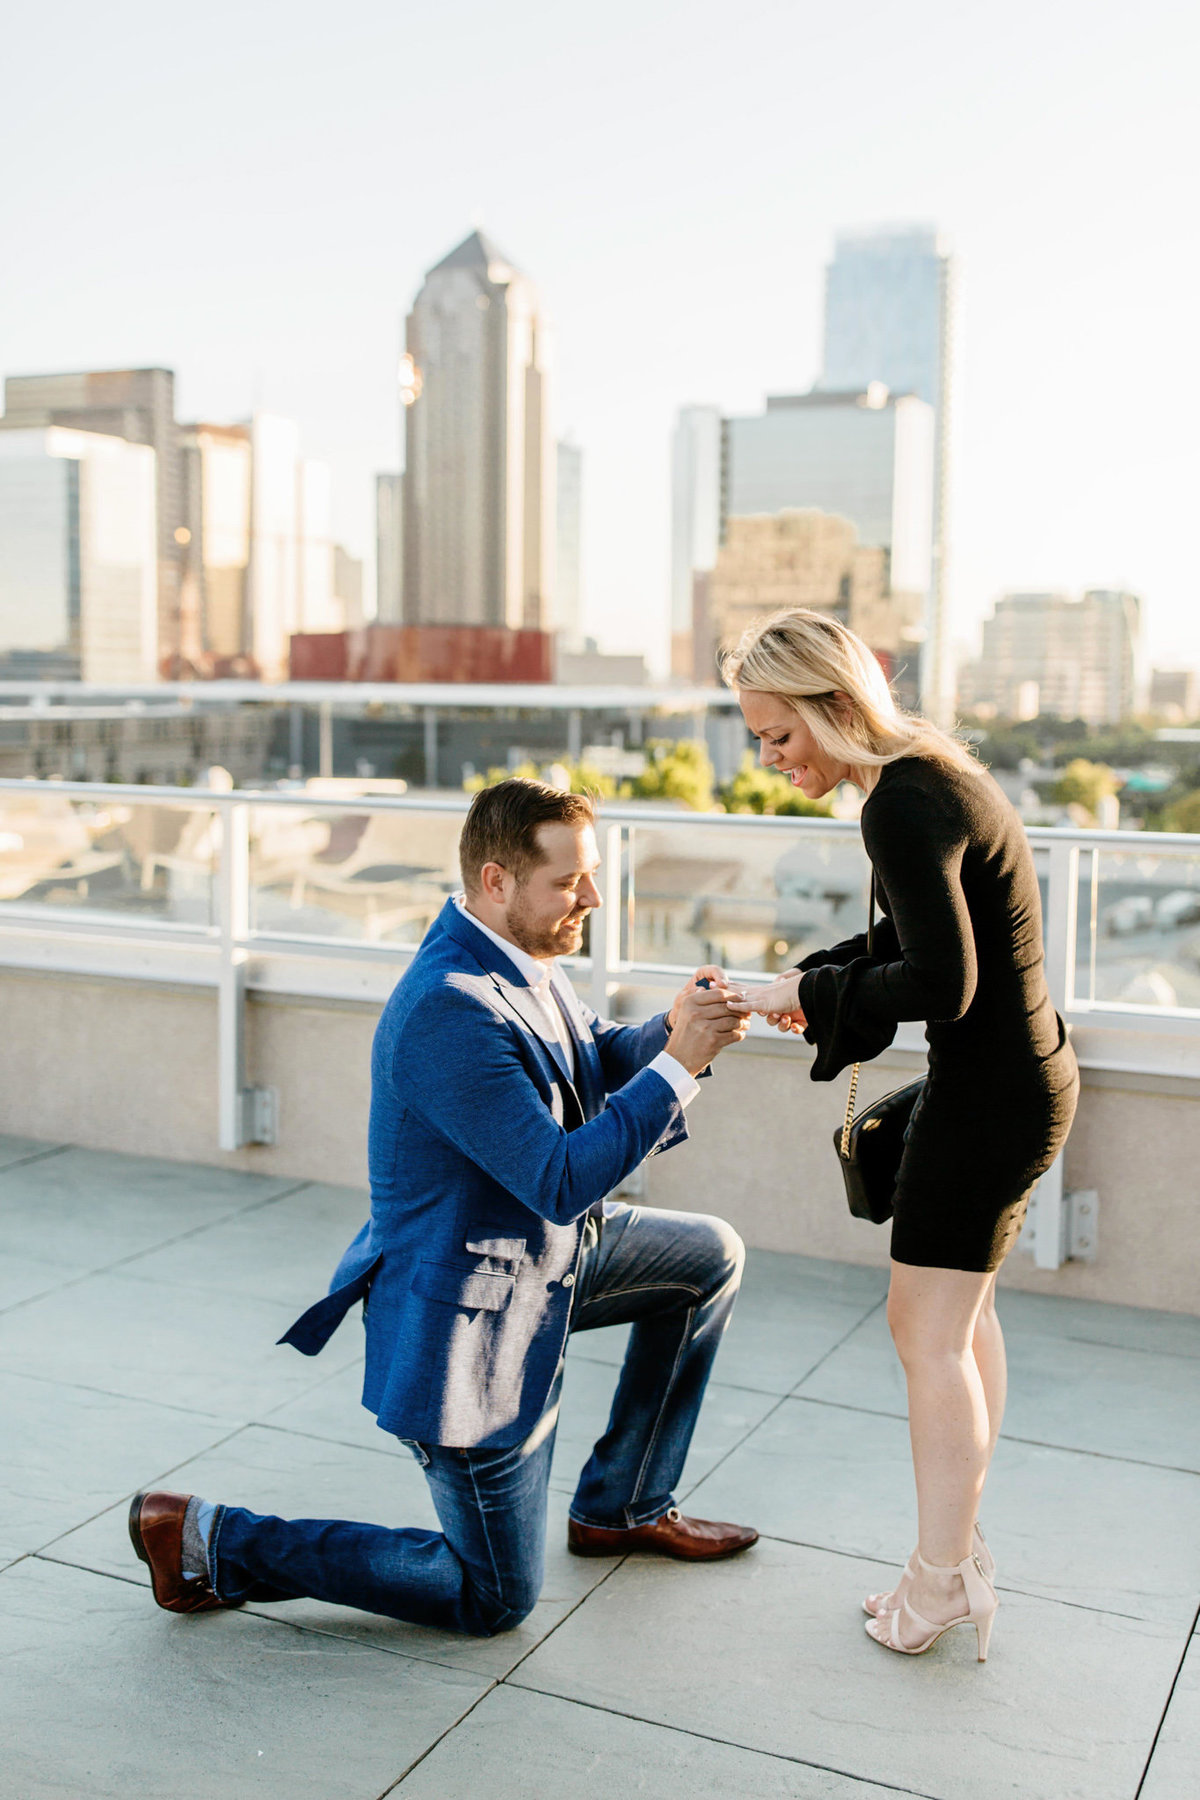 Eric & Megan - Downtown Dallas Rooftop Proposal & Engagement Session-38